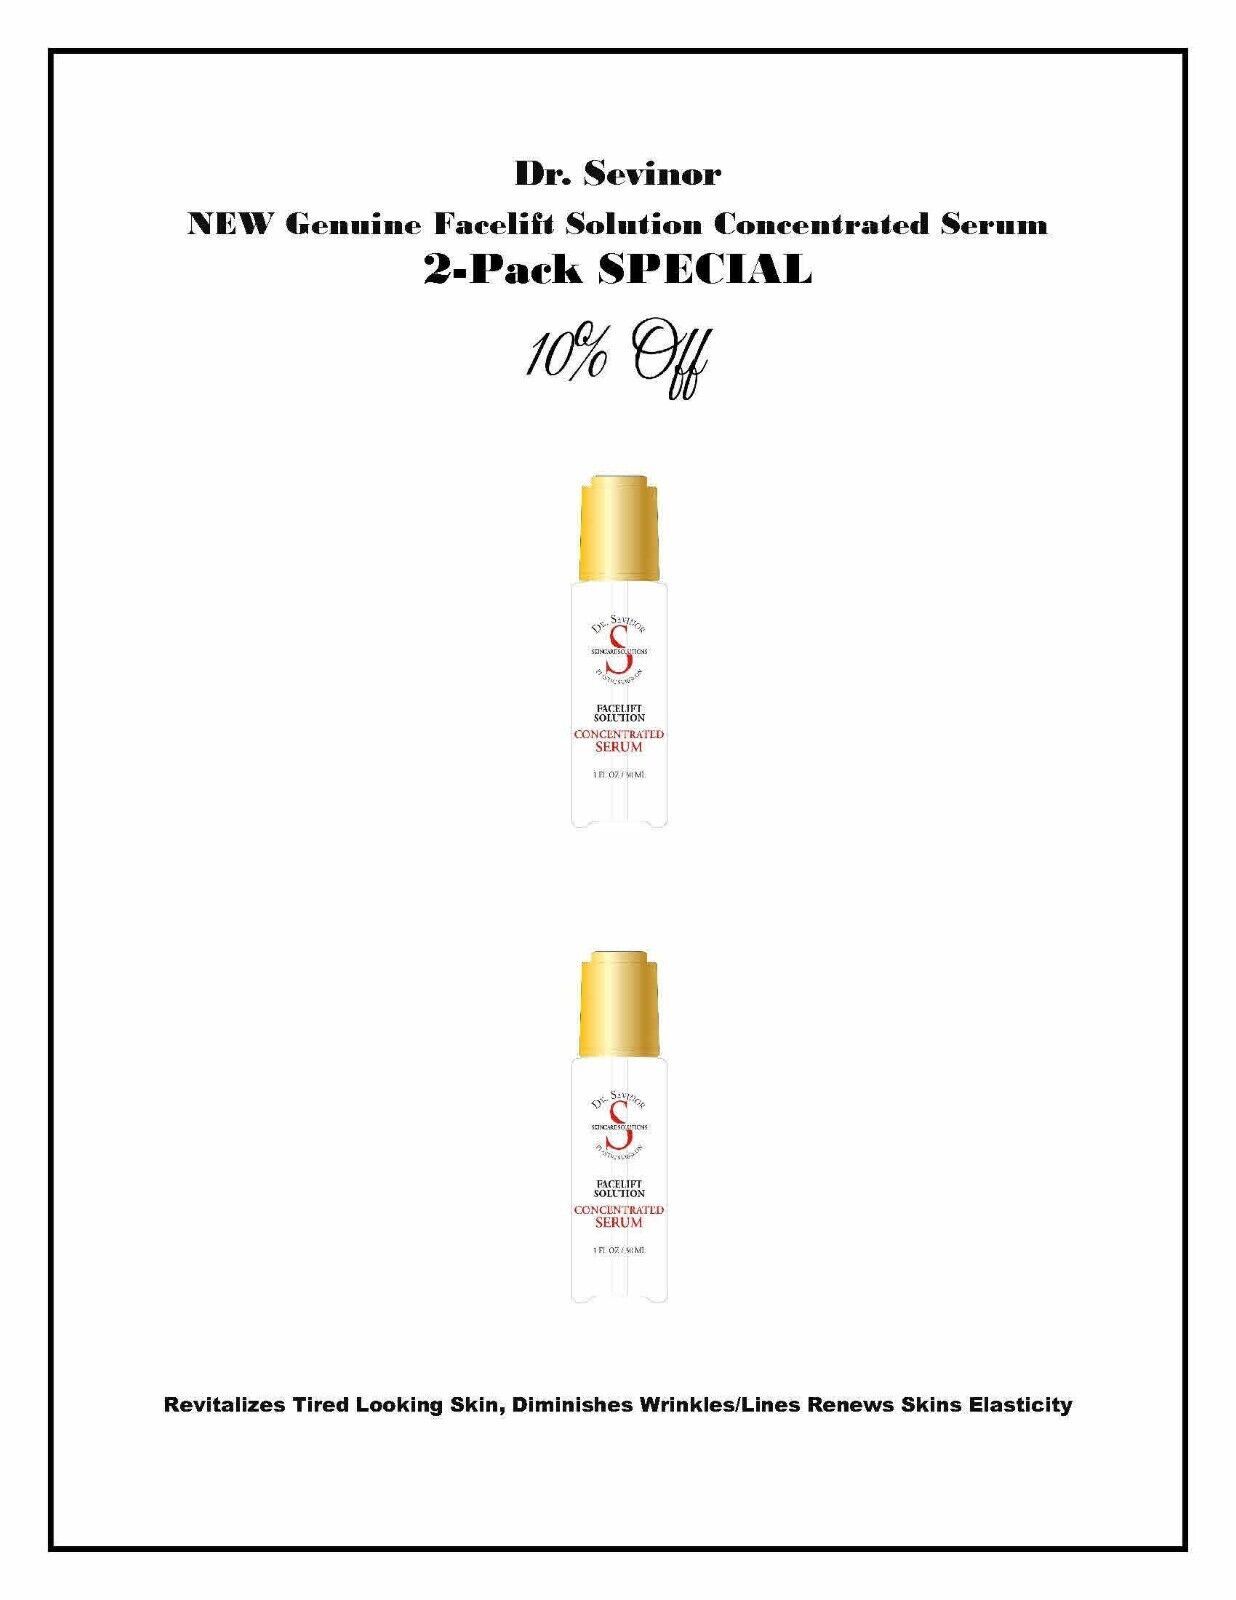 Dr. Sevinor’s NEW Genuine Facelift Solution Concentrated Serum 2-Pack SAVE 10% - $338.58